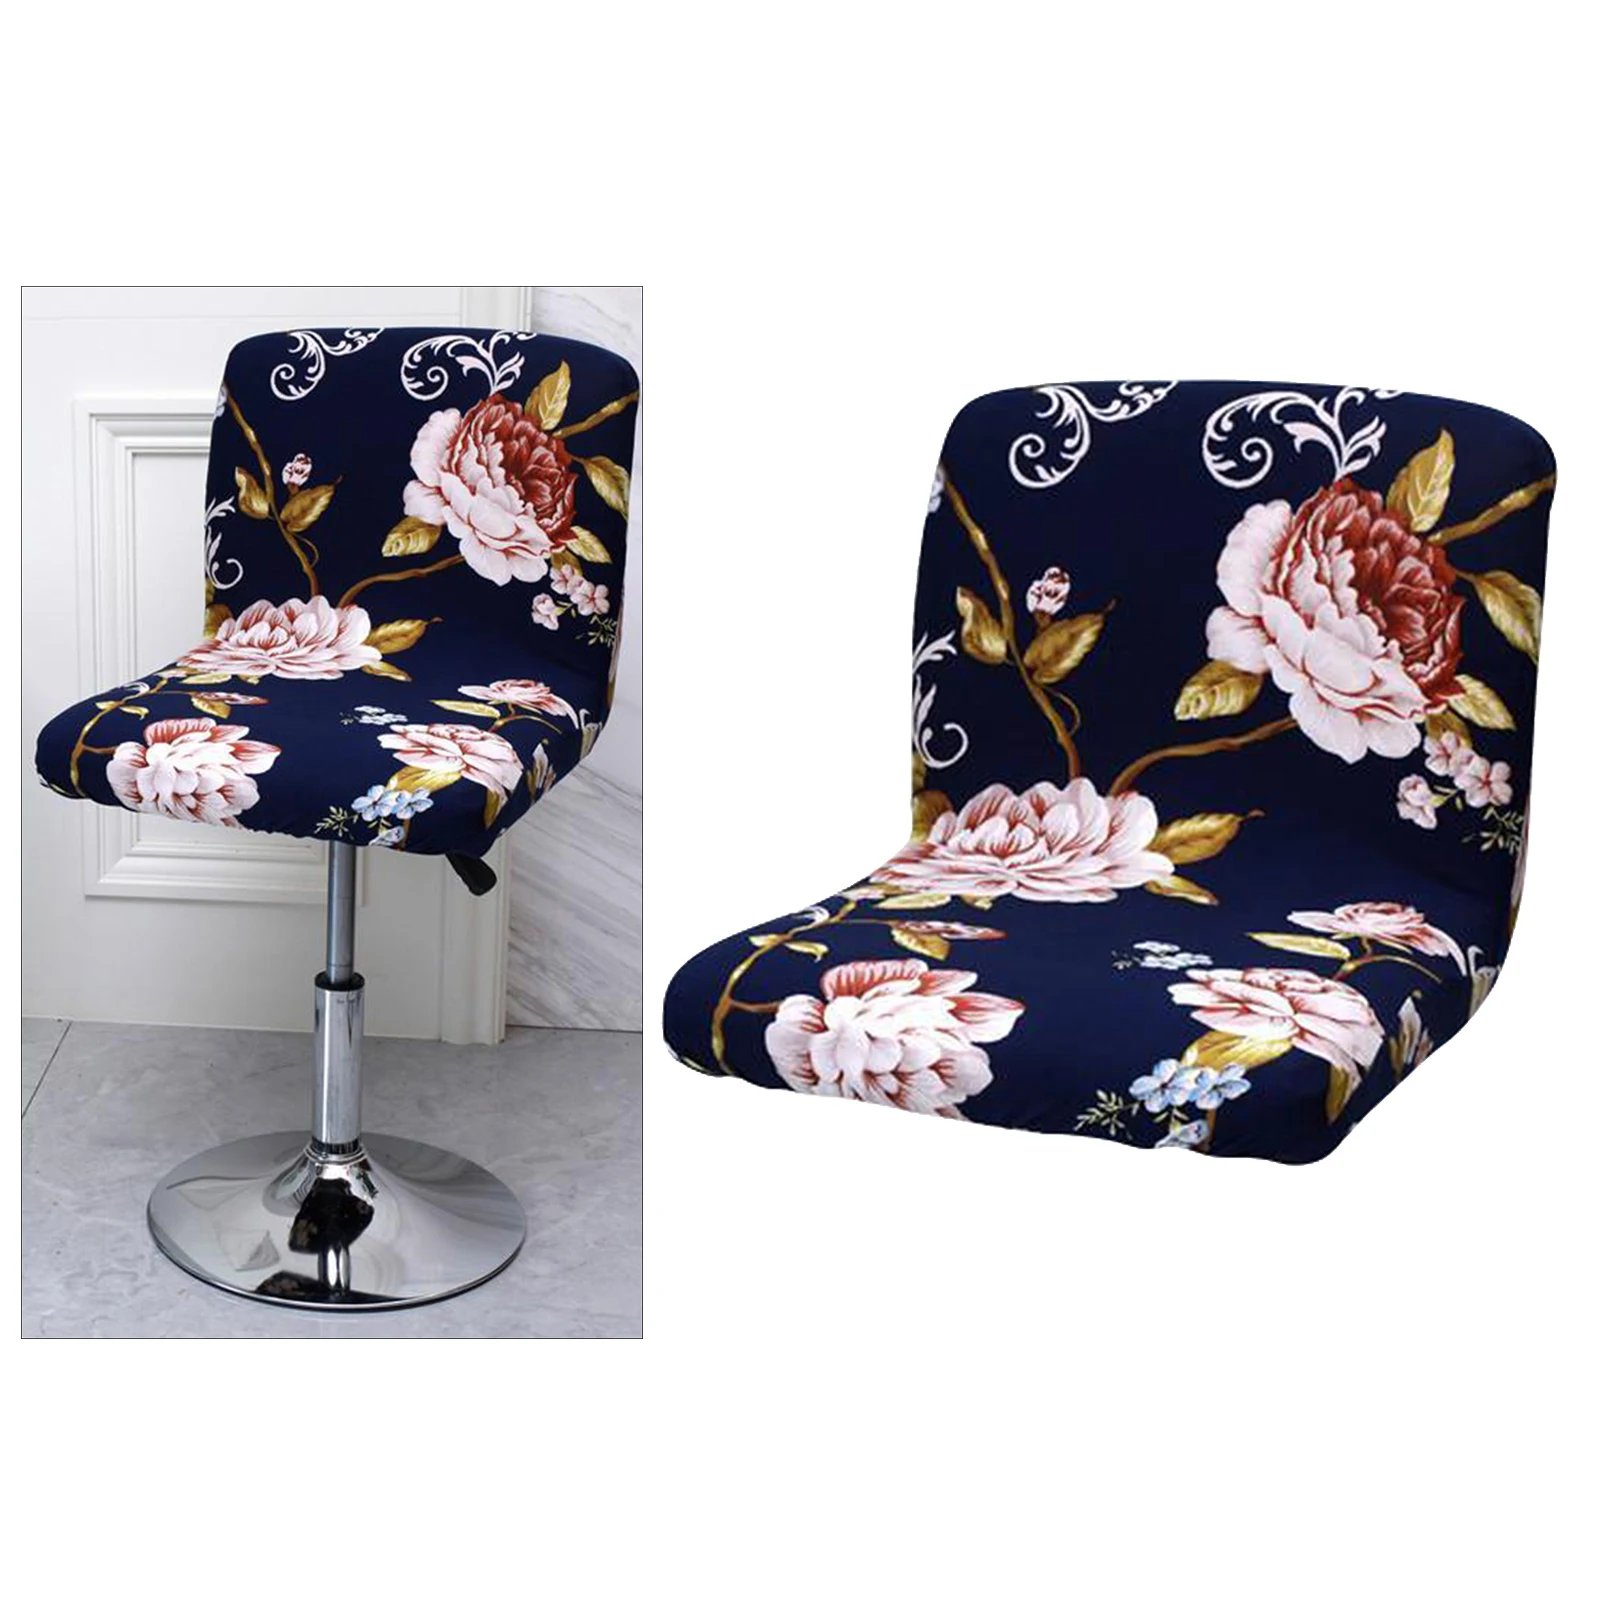 Details about   Spandex Dinner Chair Seat Cover Pub Stool Chair Slipcover for Kitchen Hotel 